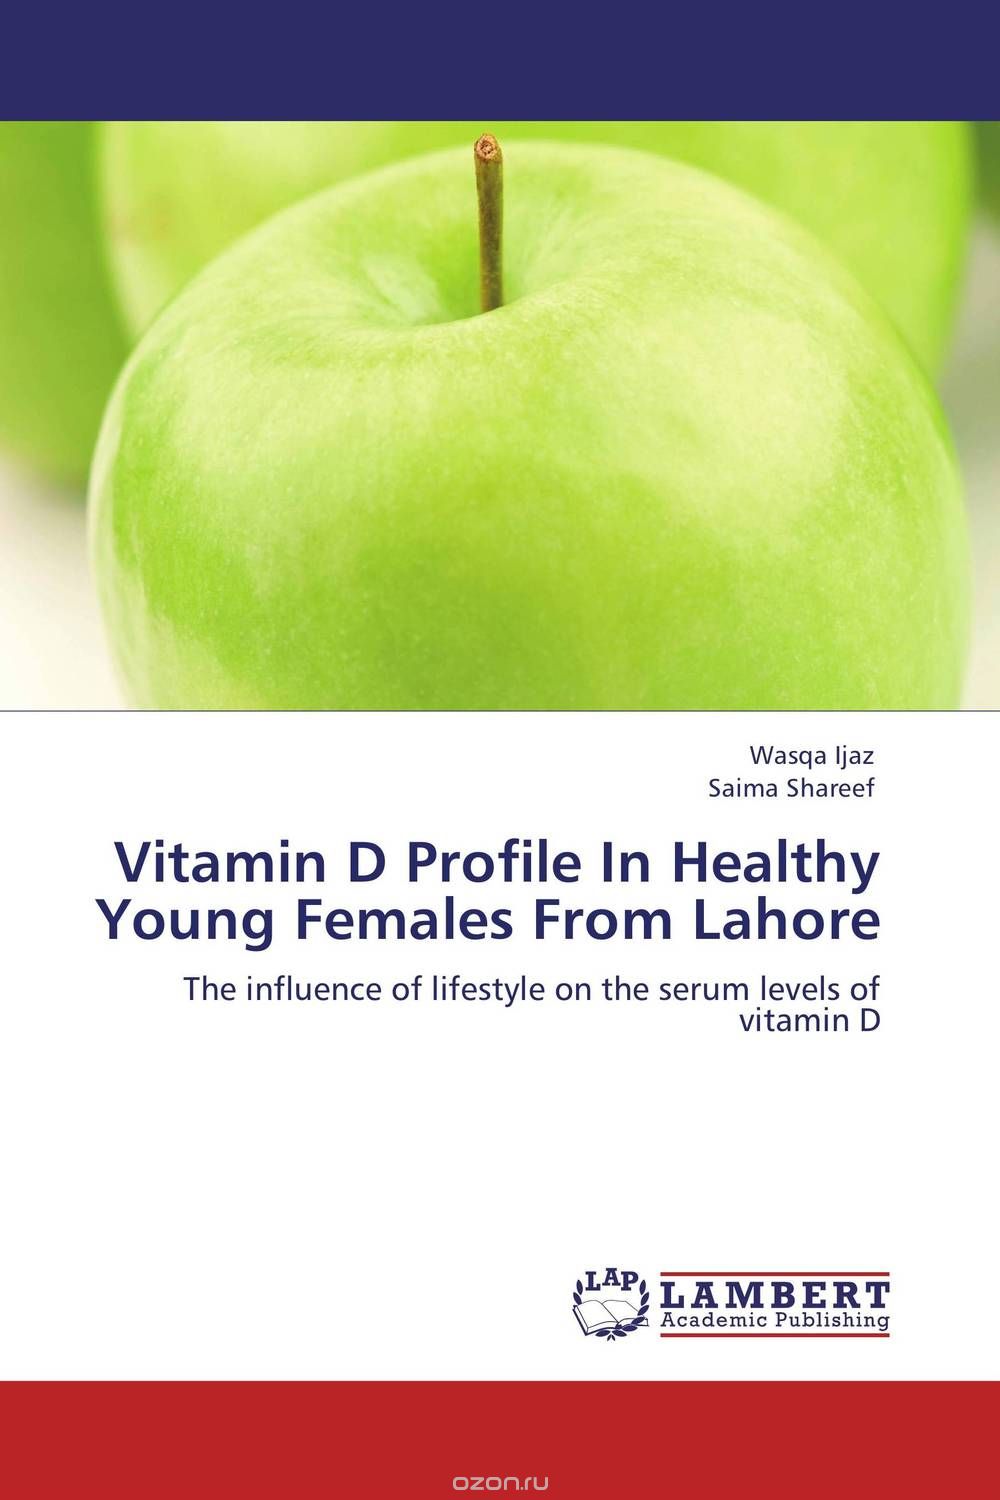 Vitamin D Profile In Healthy Young Females From Lahore